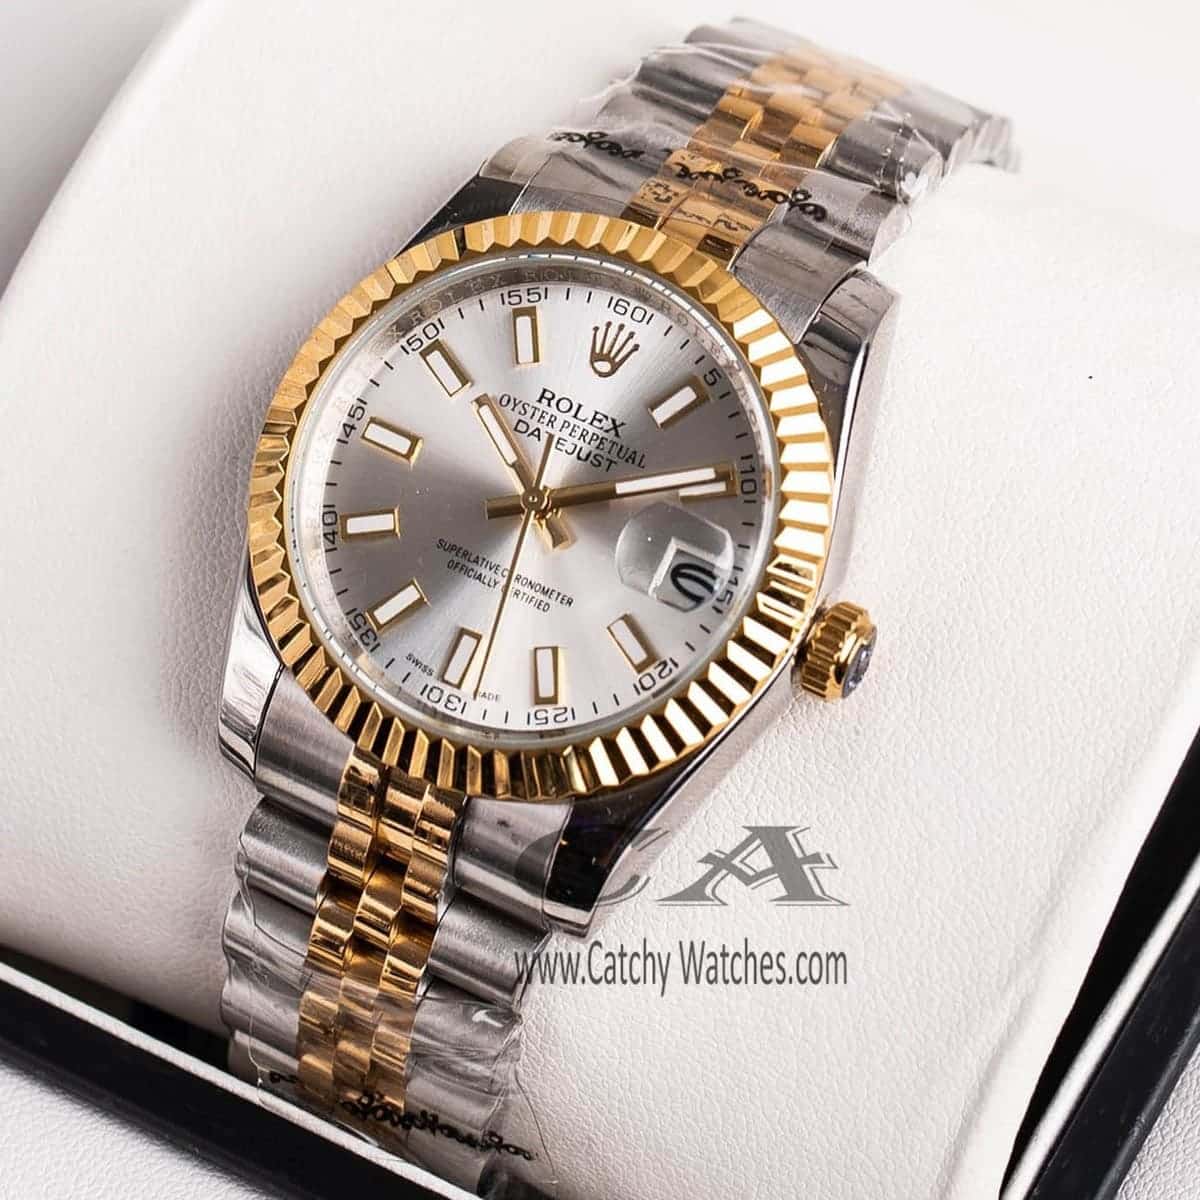 Rolex-Watches-For-Ladies-In-Egypt-With-Silver-Strap-Stainless-Steel-Belt-Gray-Dial-anlog